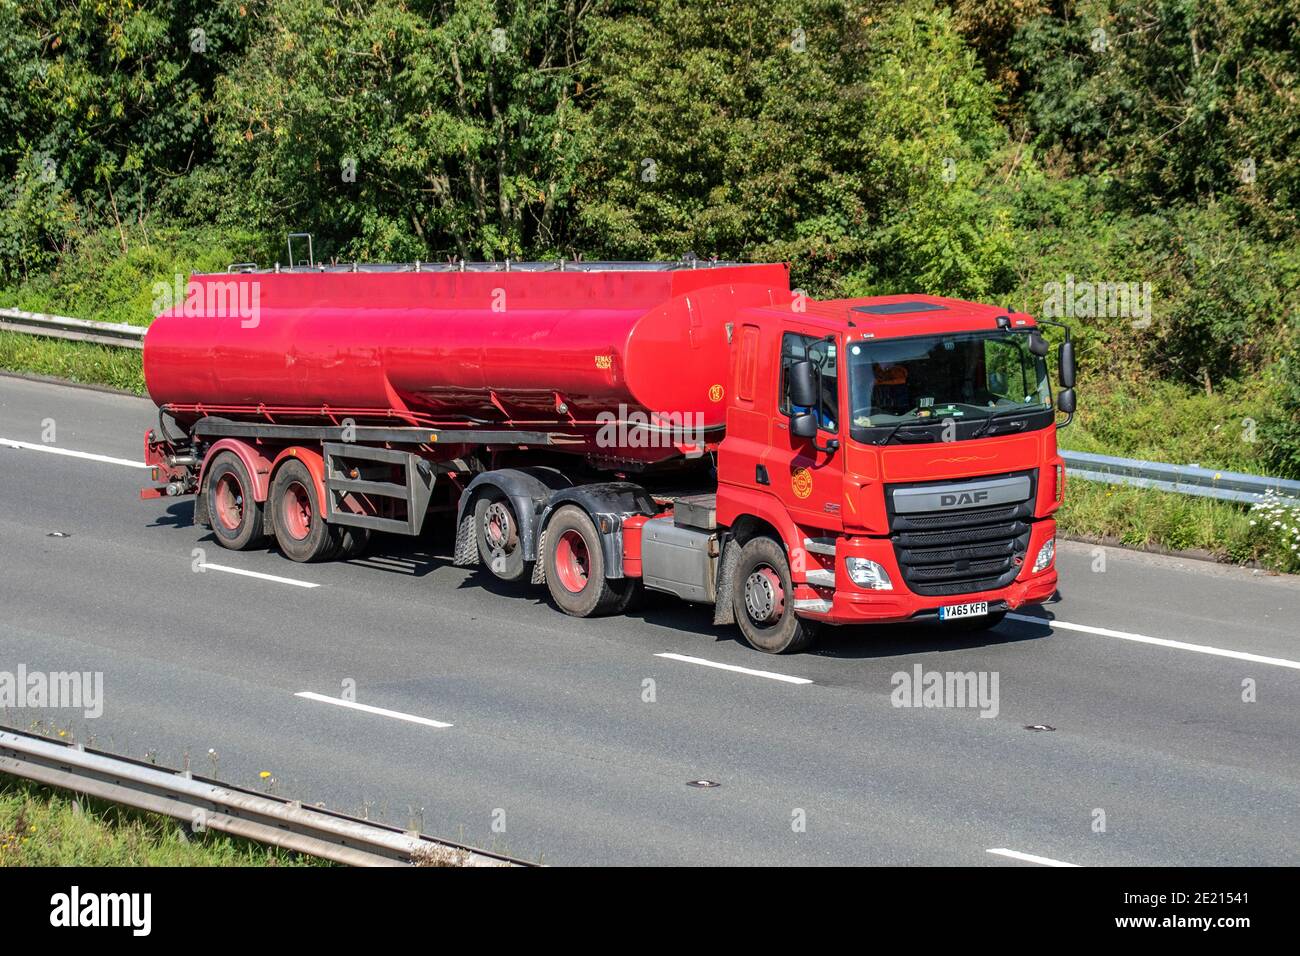 J E Morten Ltd High Peak Haulage delivery trucks, lorry, heavy-duty vehicles, transportation, truck, cargo carrier, red DAF CF tanker vehicle, European commercial transport industry HGV, M6 at Manchester, UK Stock Photo